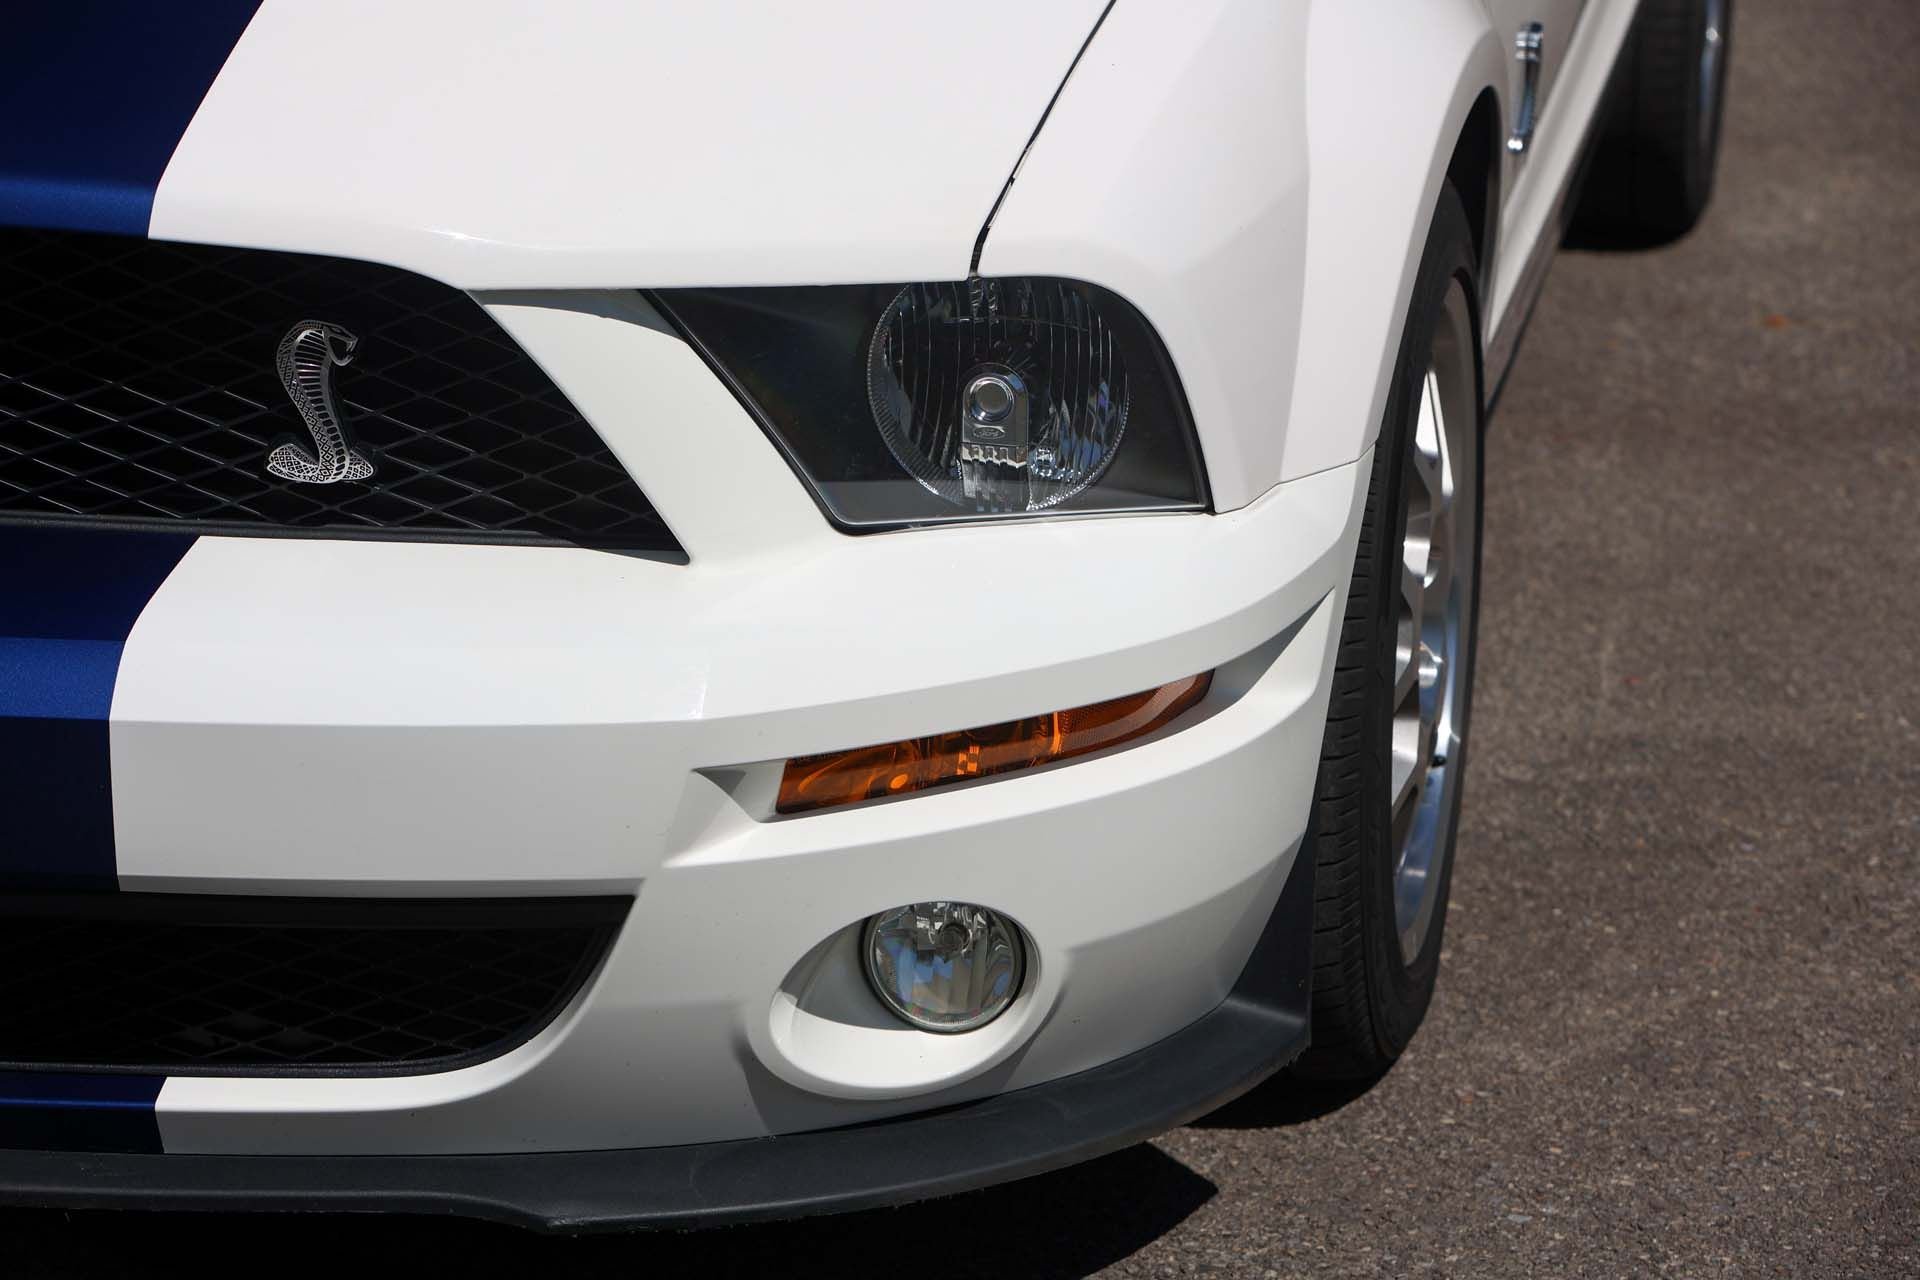 For Sale 2008 Ford Shelby Mustang GT500 Convertible